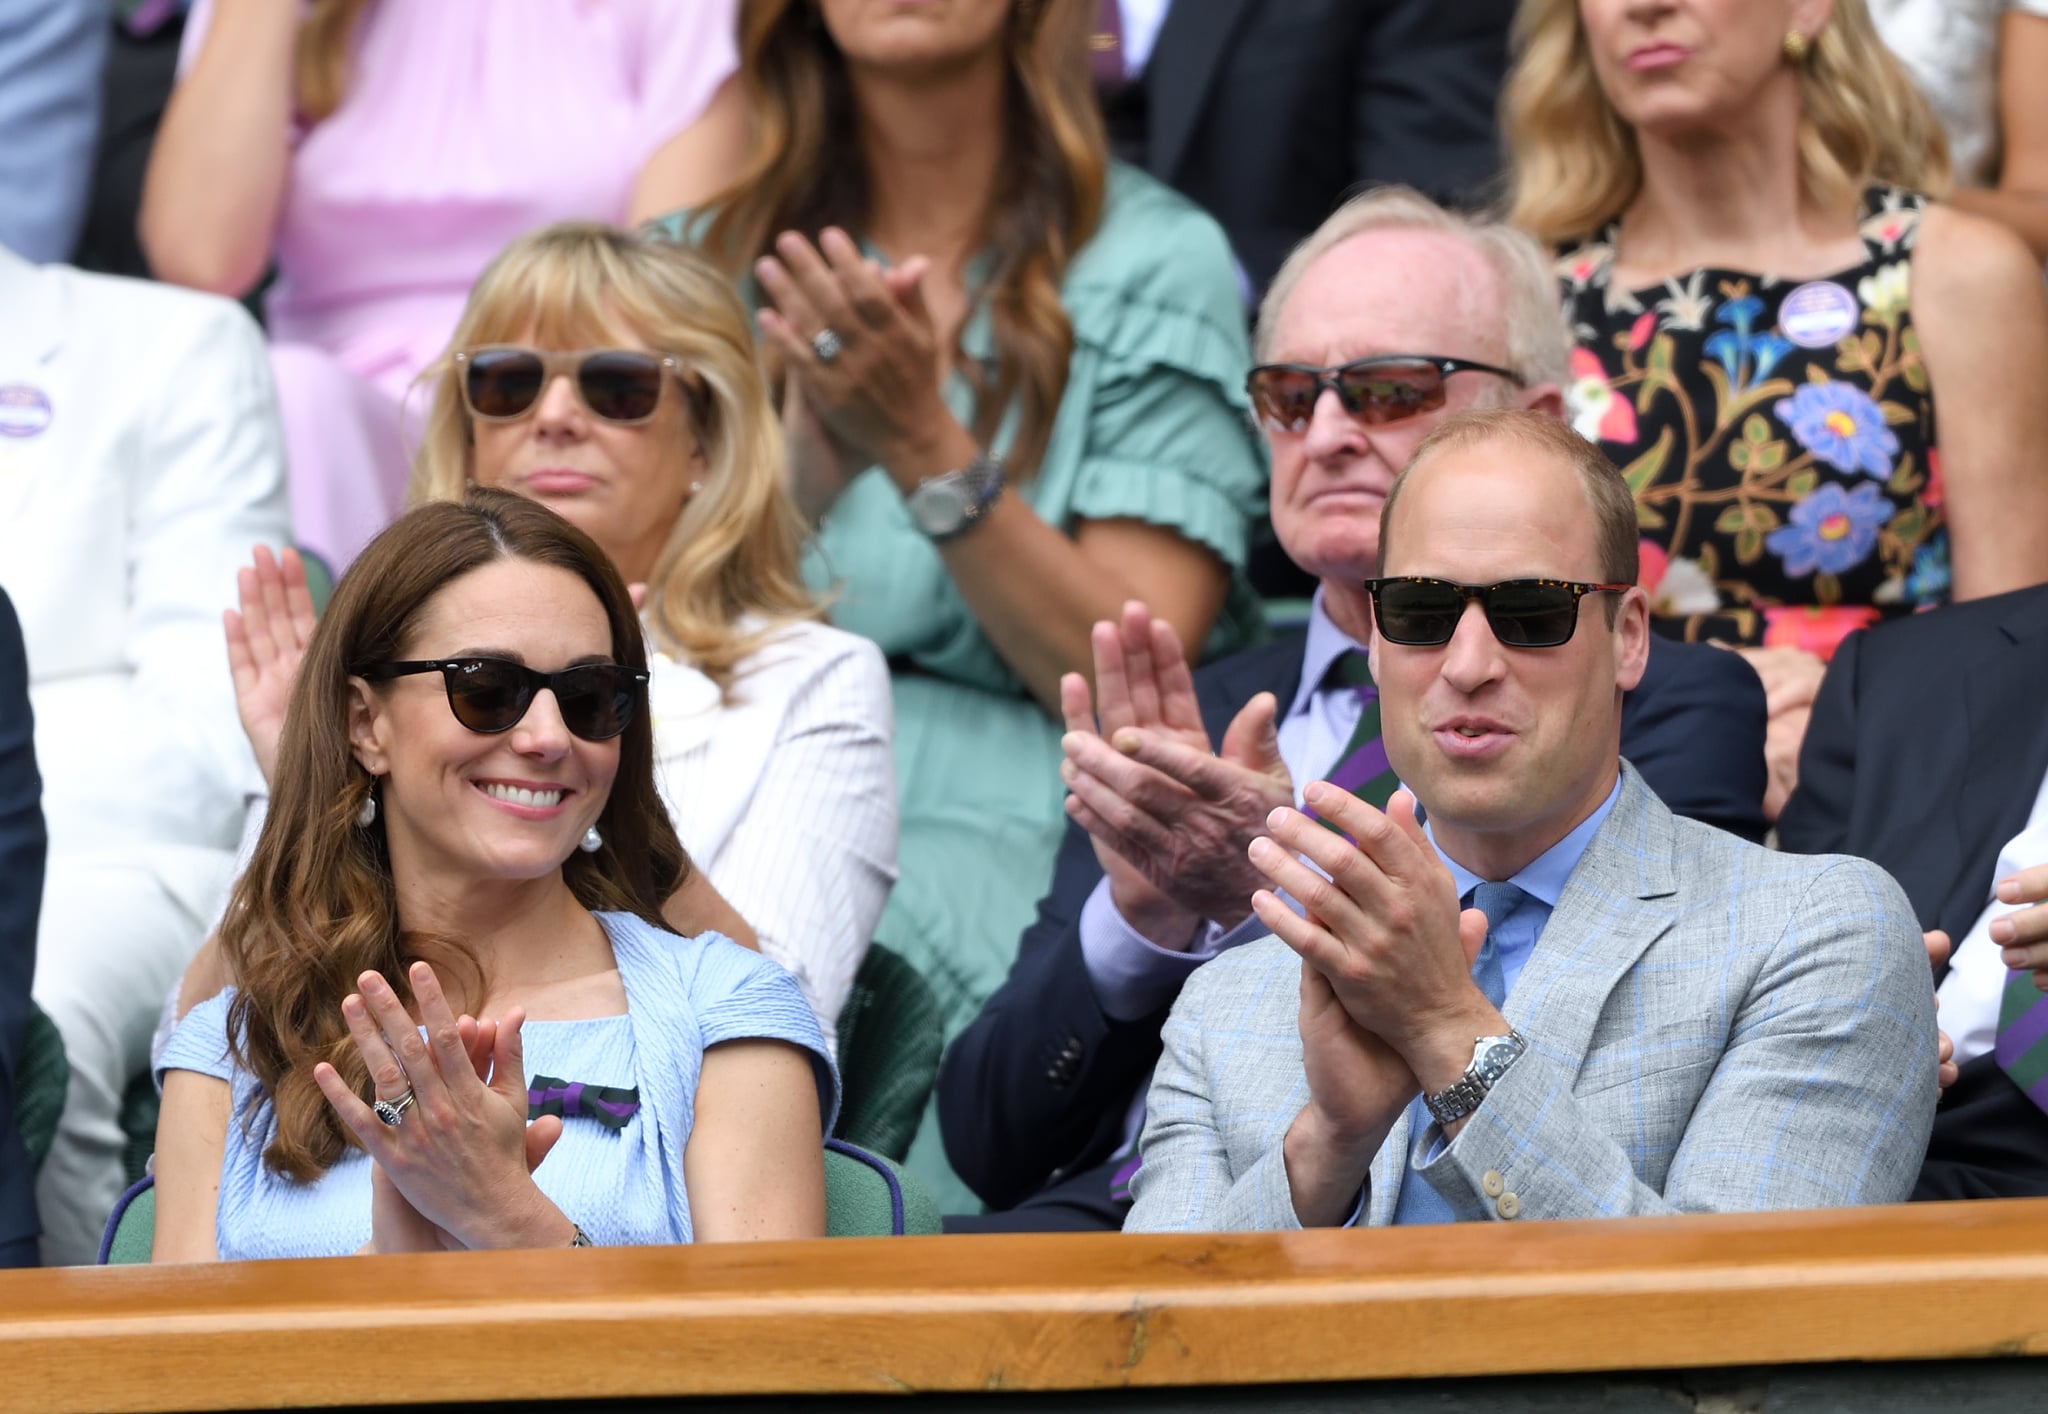 LONDON, ENGLAND - JULY 14: Catherine, Duchess of Cambridge and Prince William, Duke of Cambridge in the Royal Box on Centre court during Men